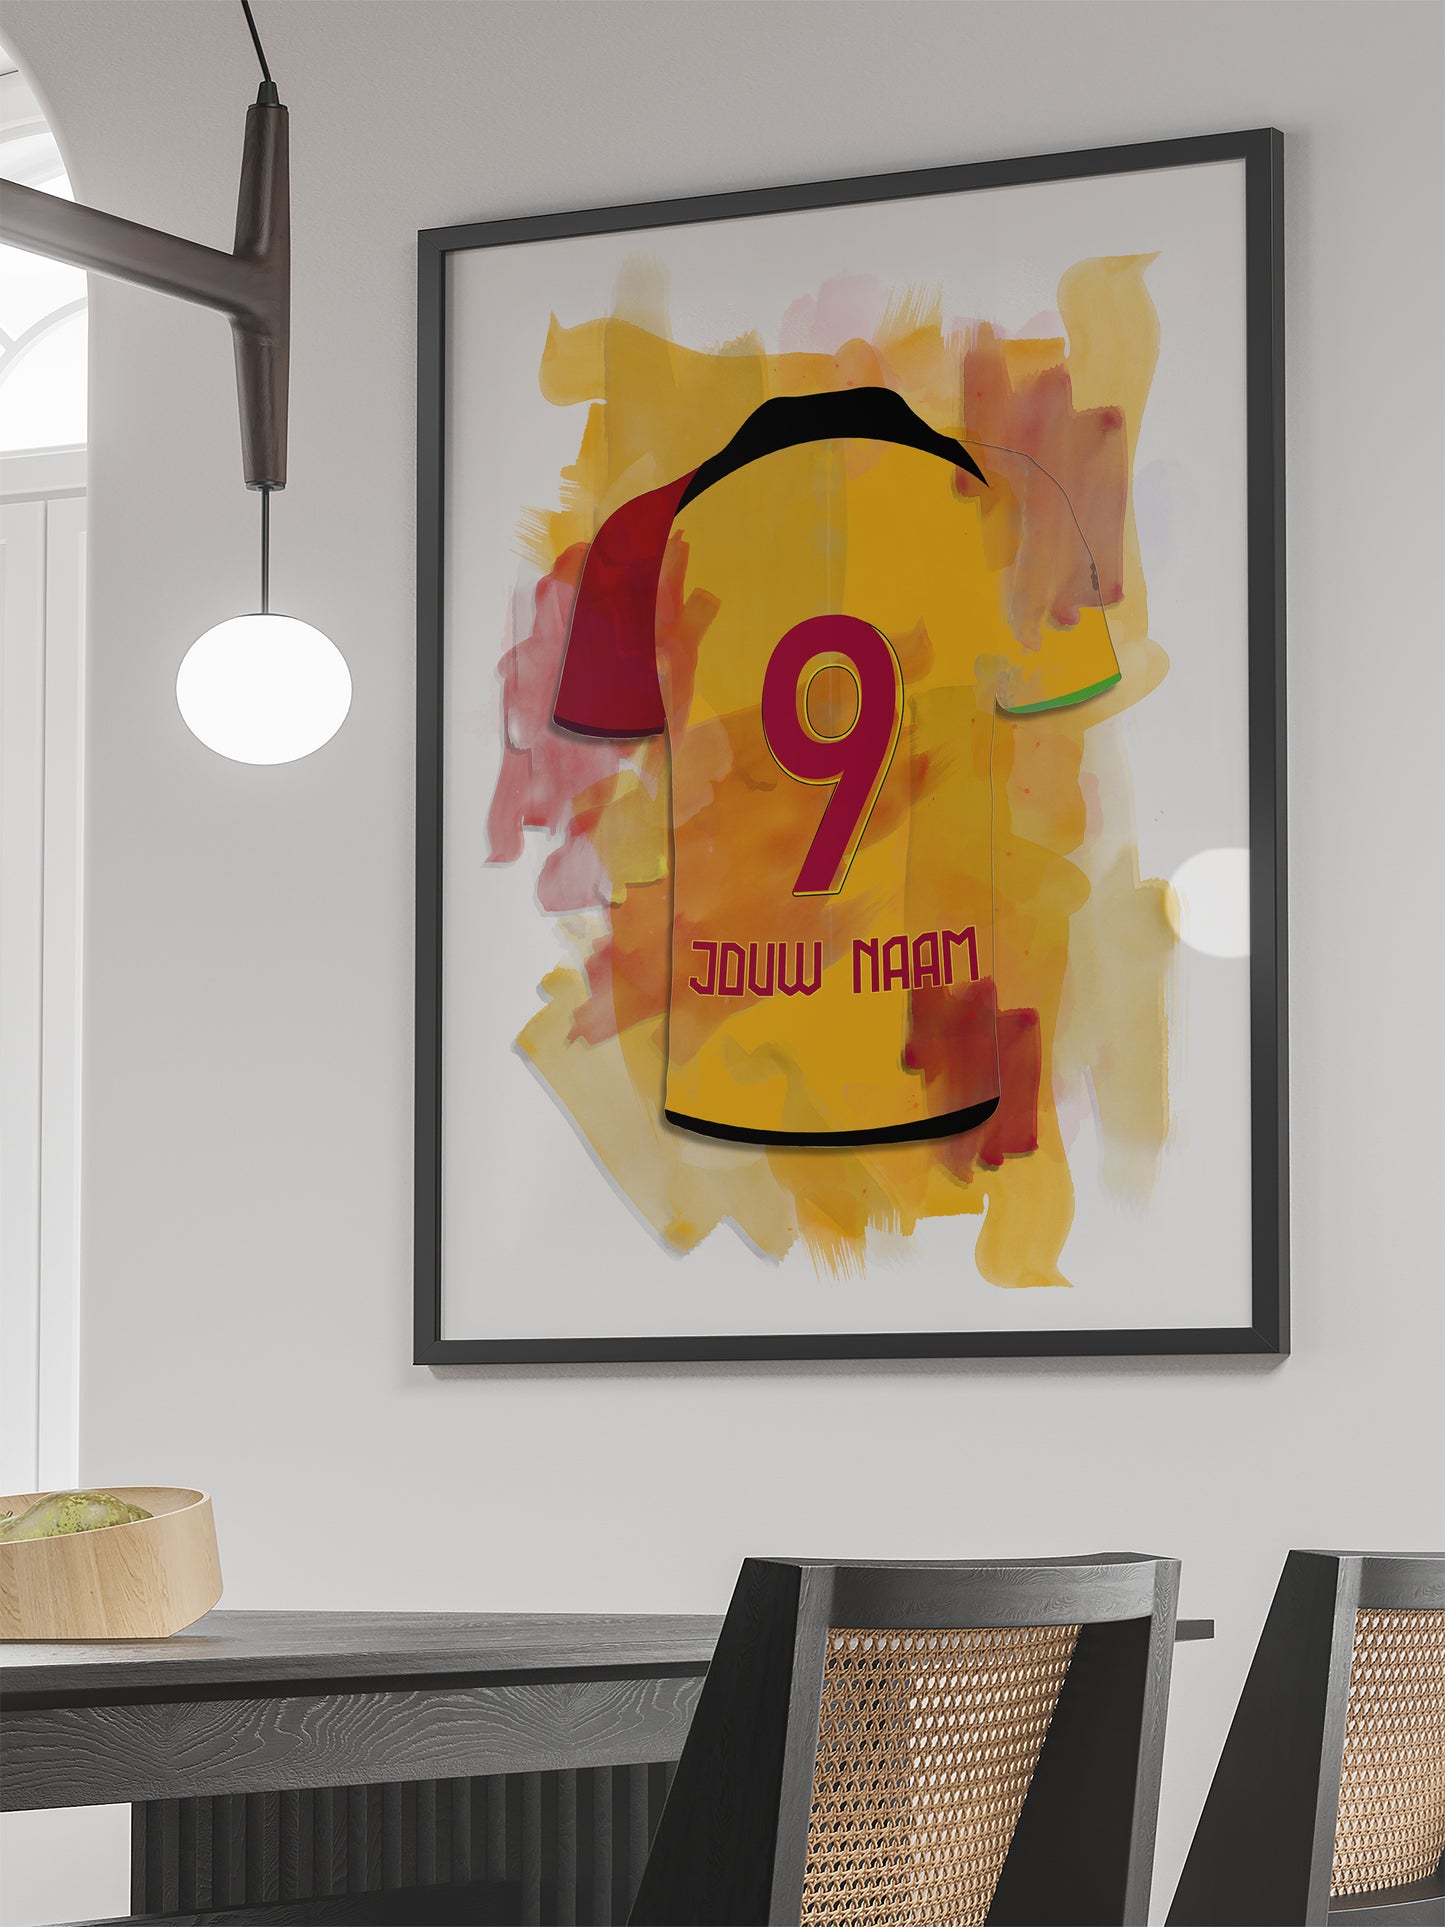 Customizable Galatasaray Football Jersey Frame Digital Printable Material  Sports Themed Wall Art Special Day Gift Soccer Poster 